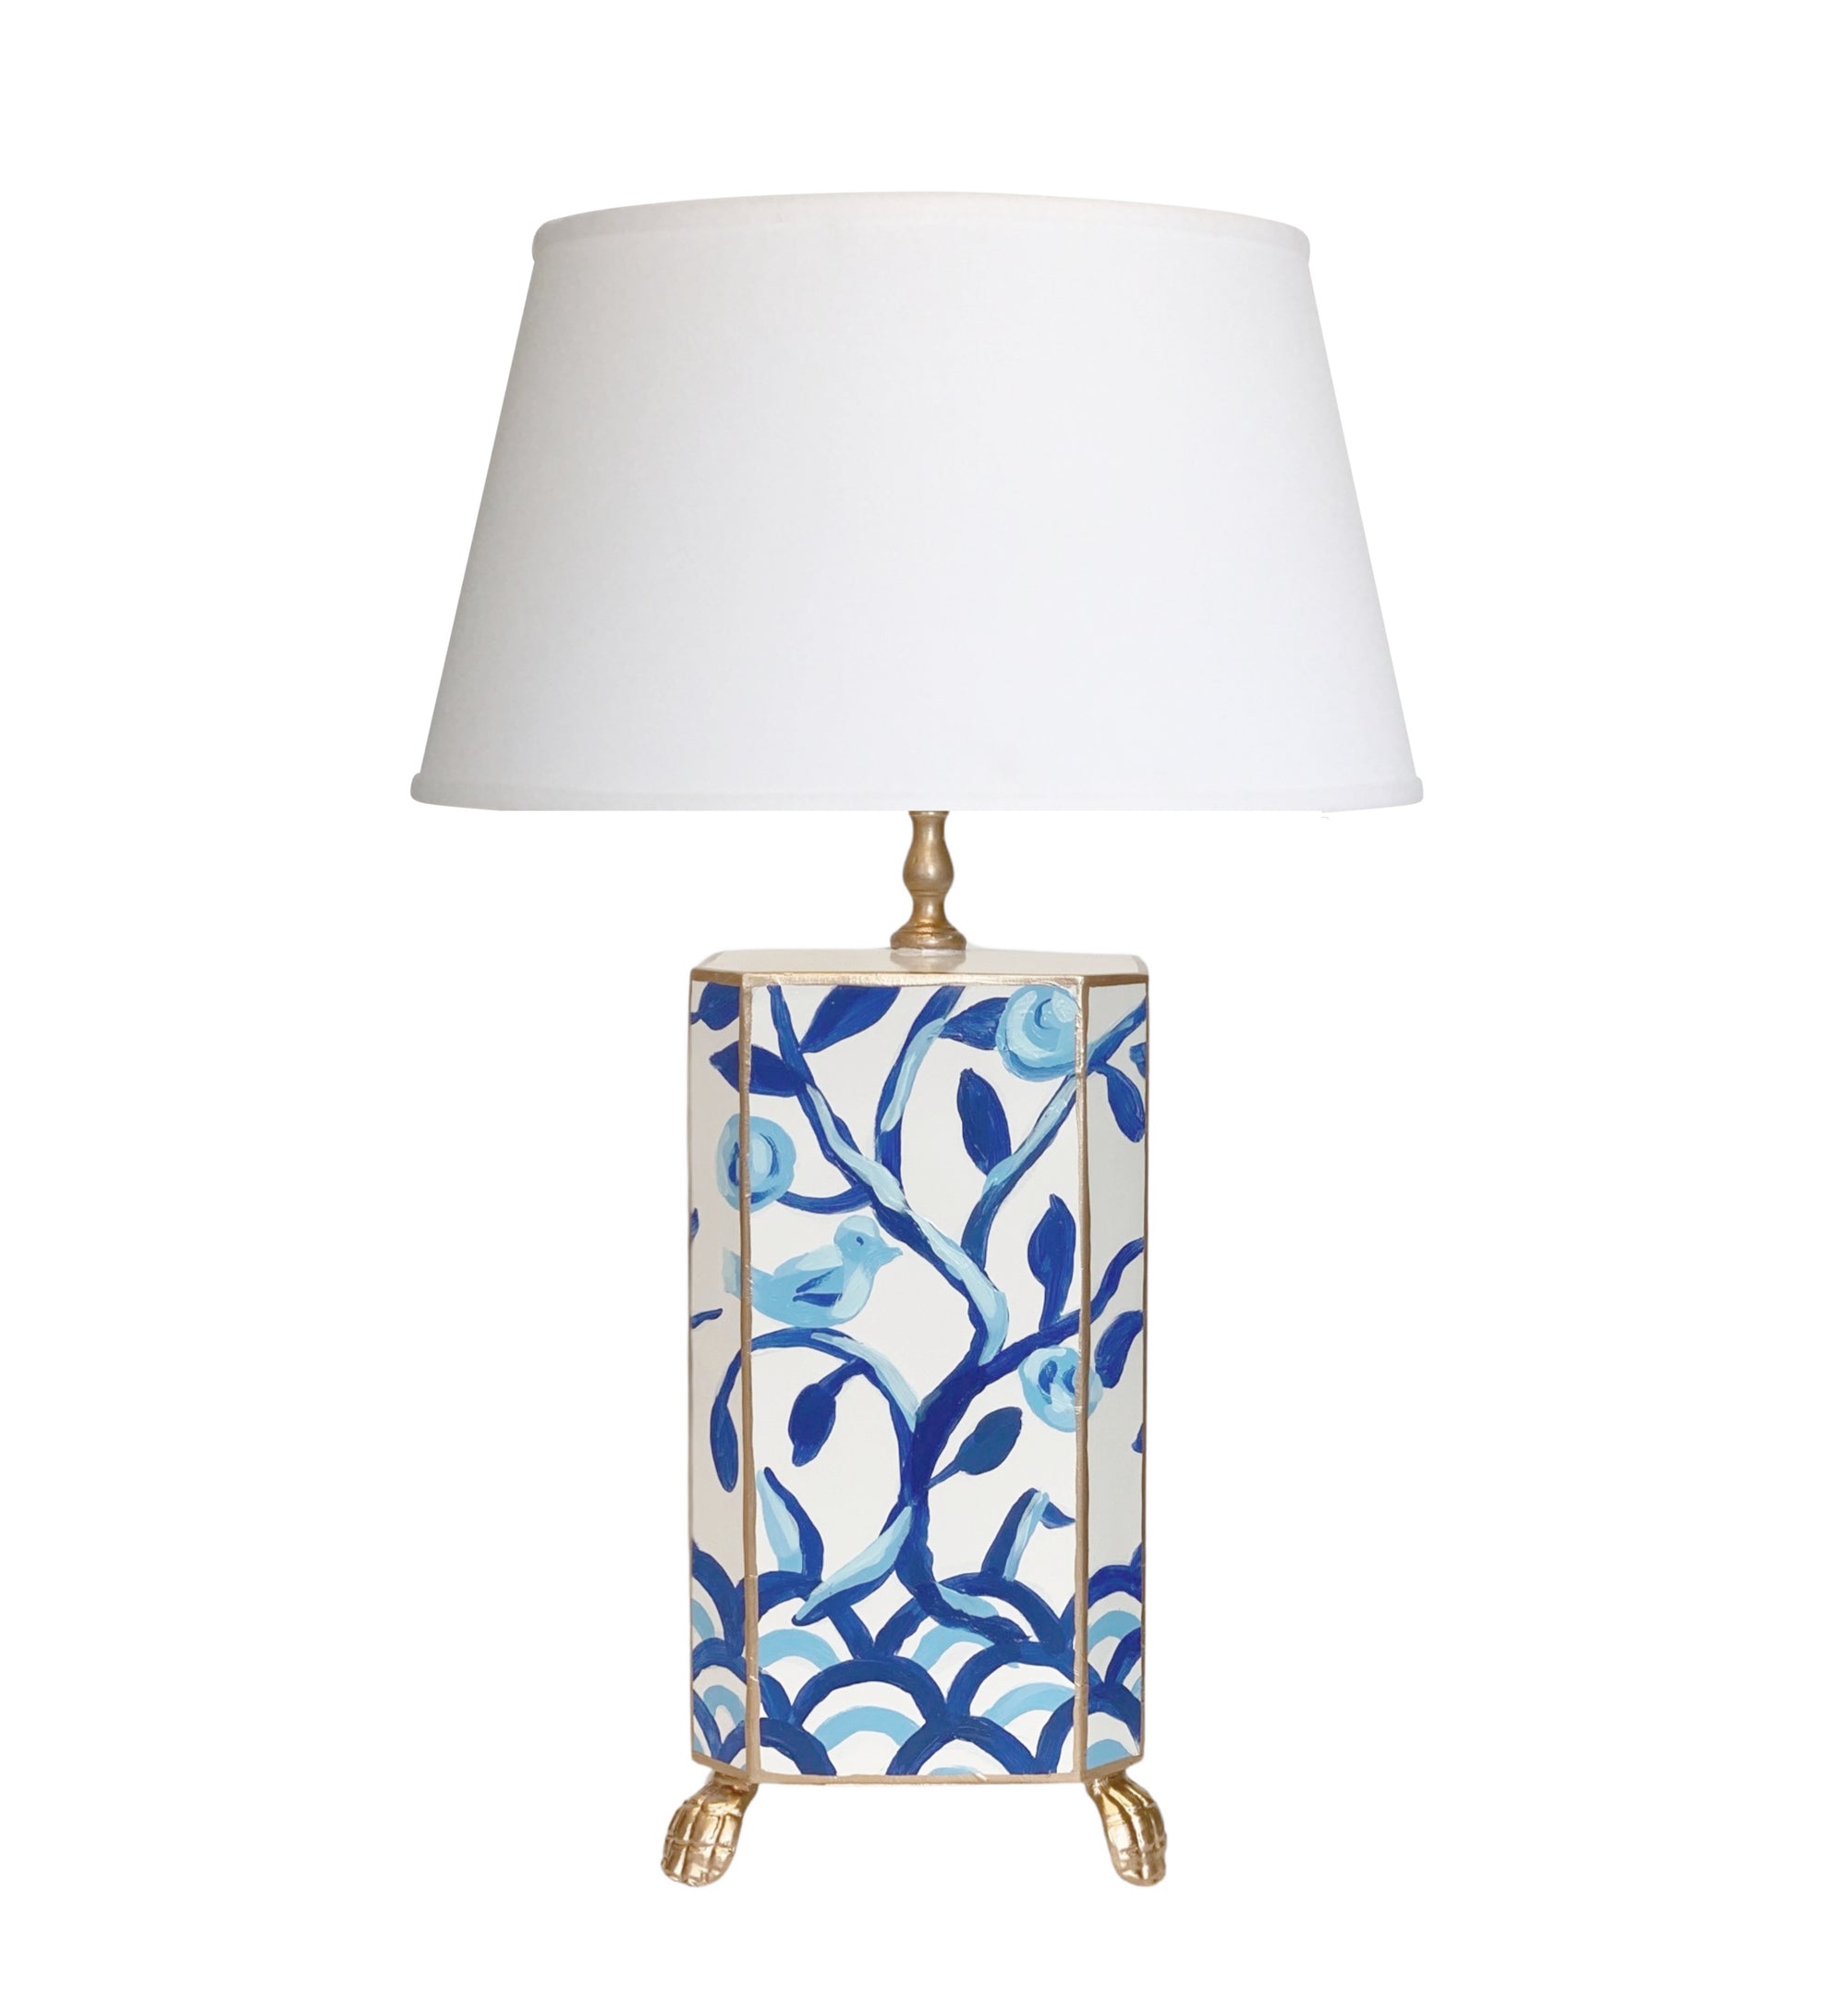 Dana Gibson Cliveden in Blue Small Lamp